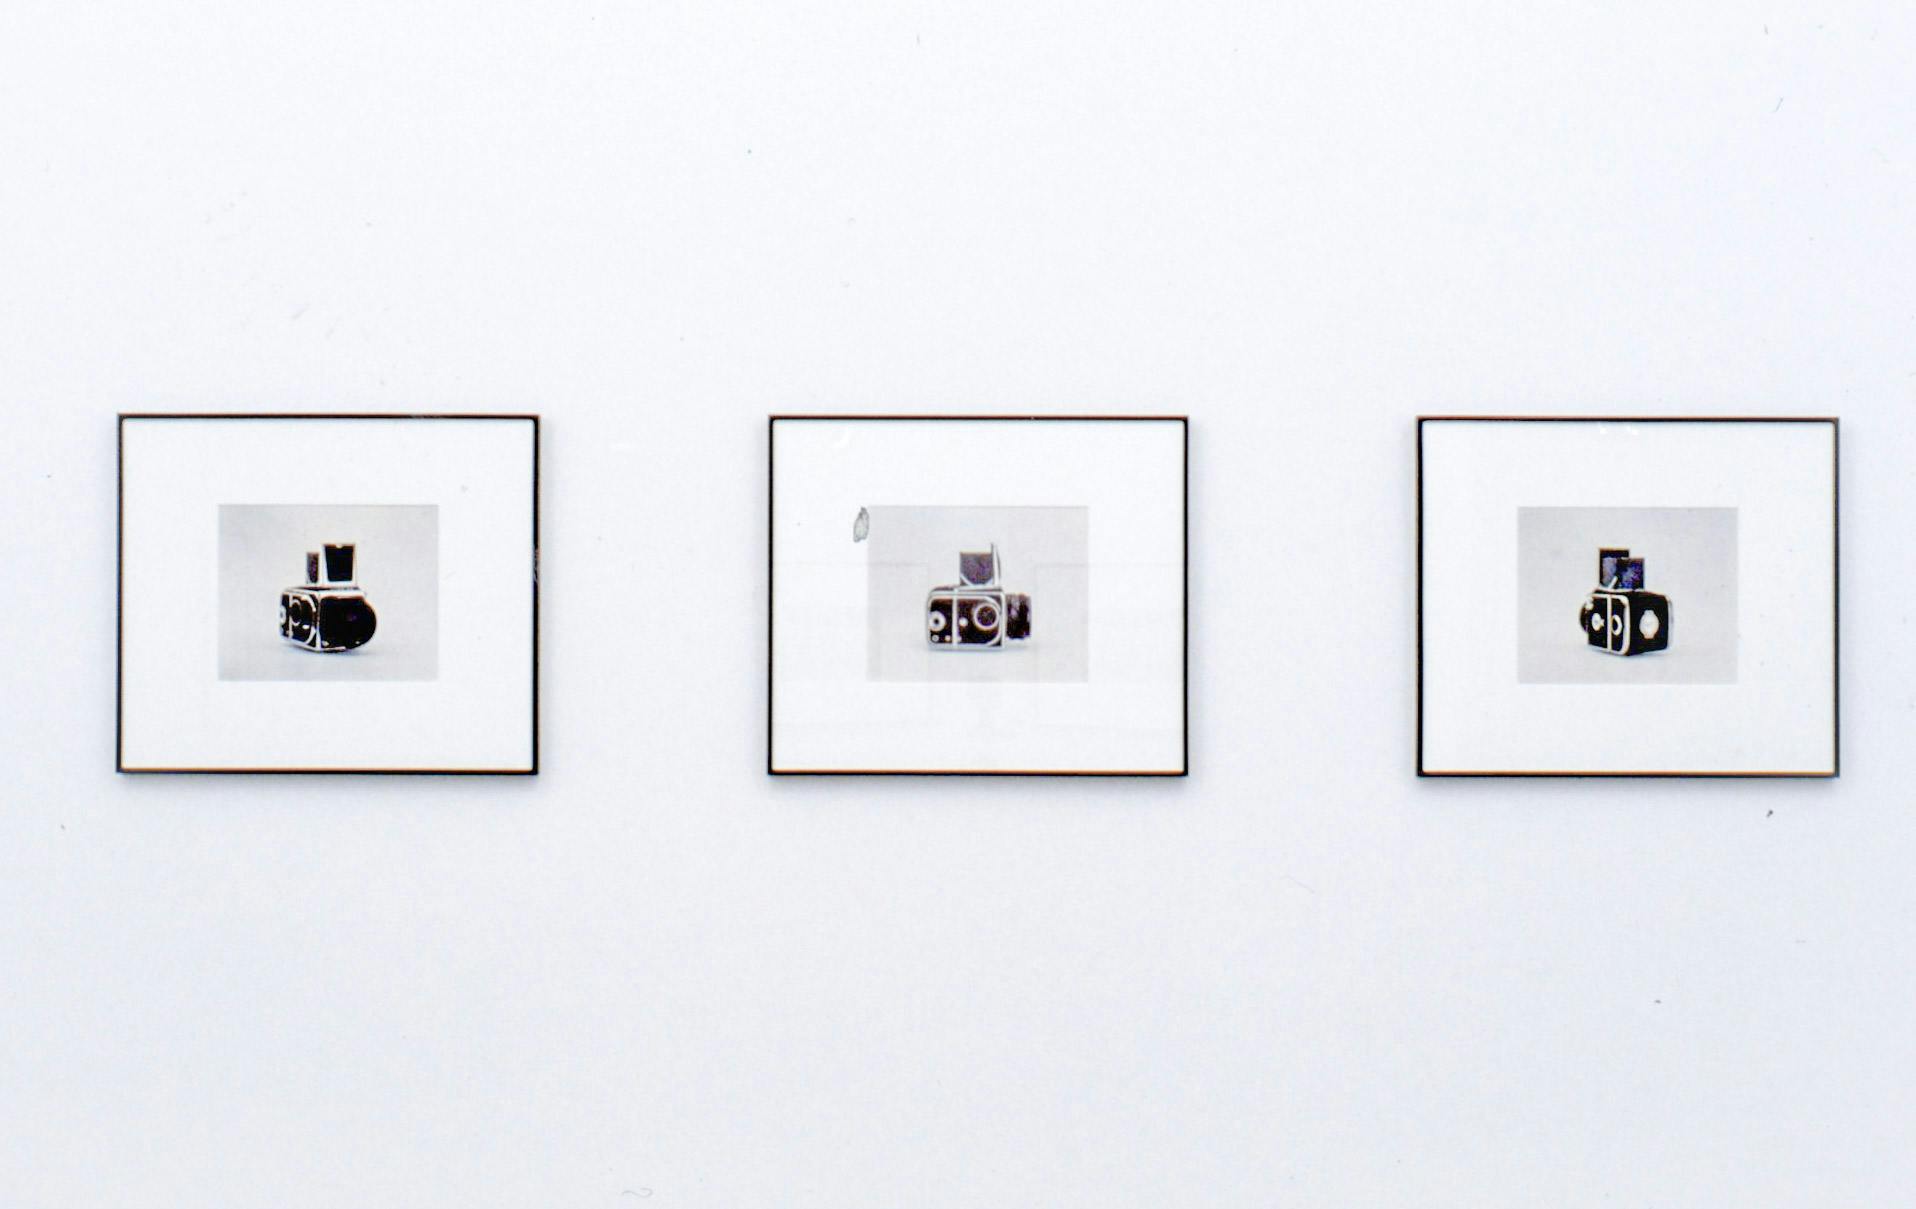 An installation image of three coloured photographs on a wall. These photographs depict different sides of an old black camera.